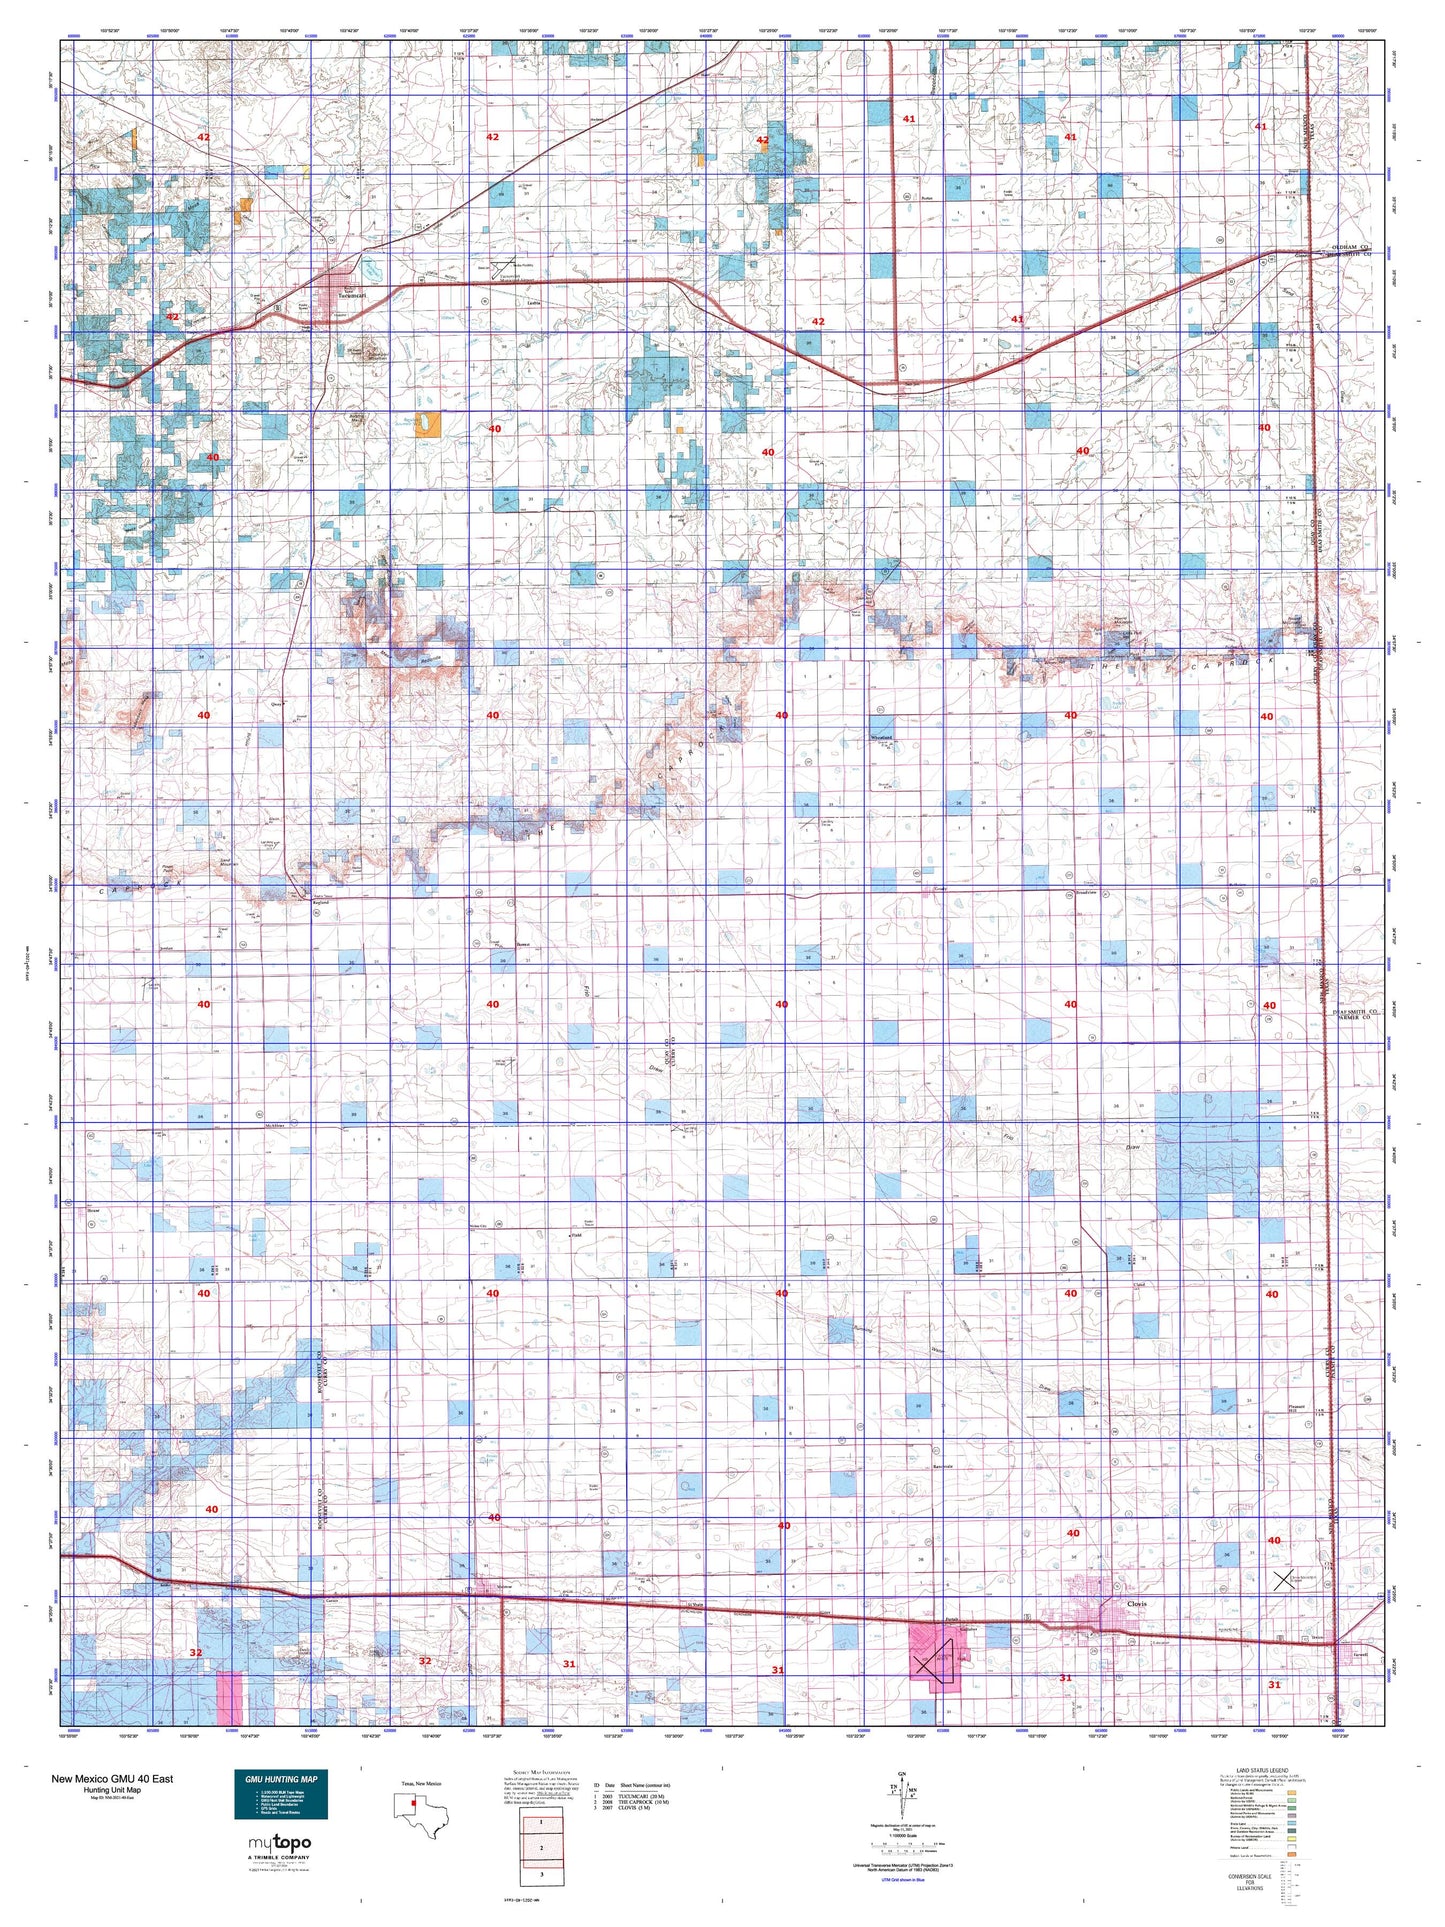 New Mexico GMU 40 East Map Image